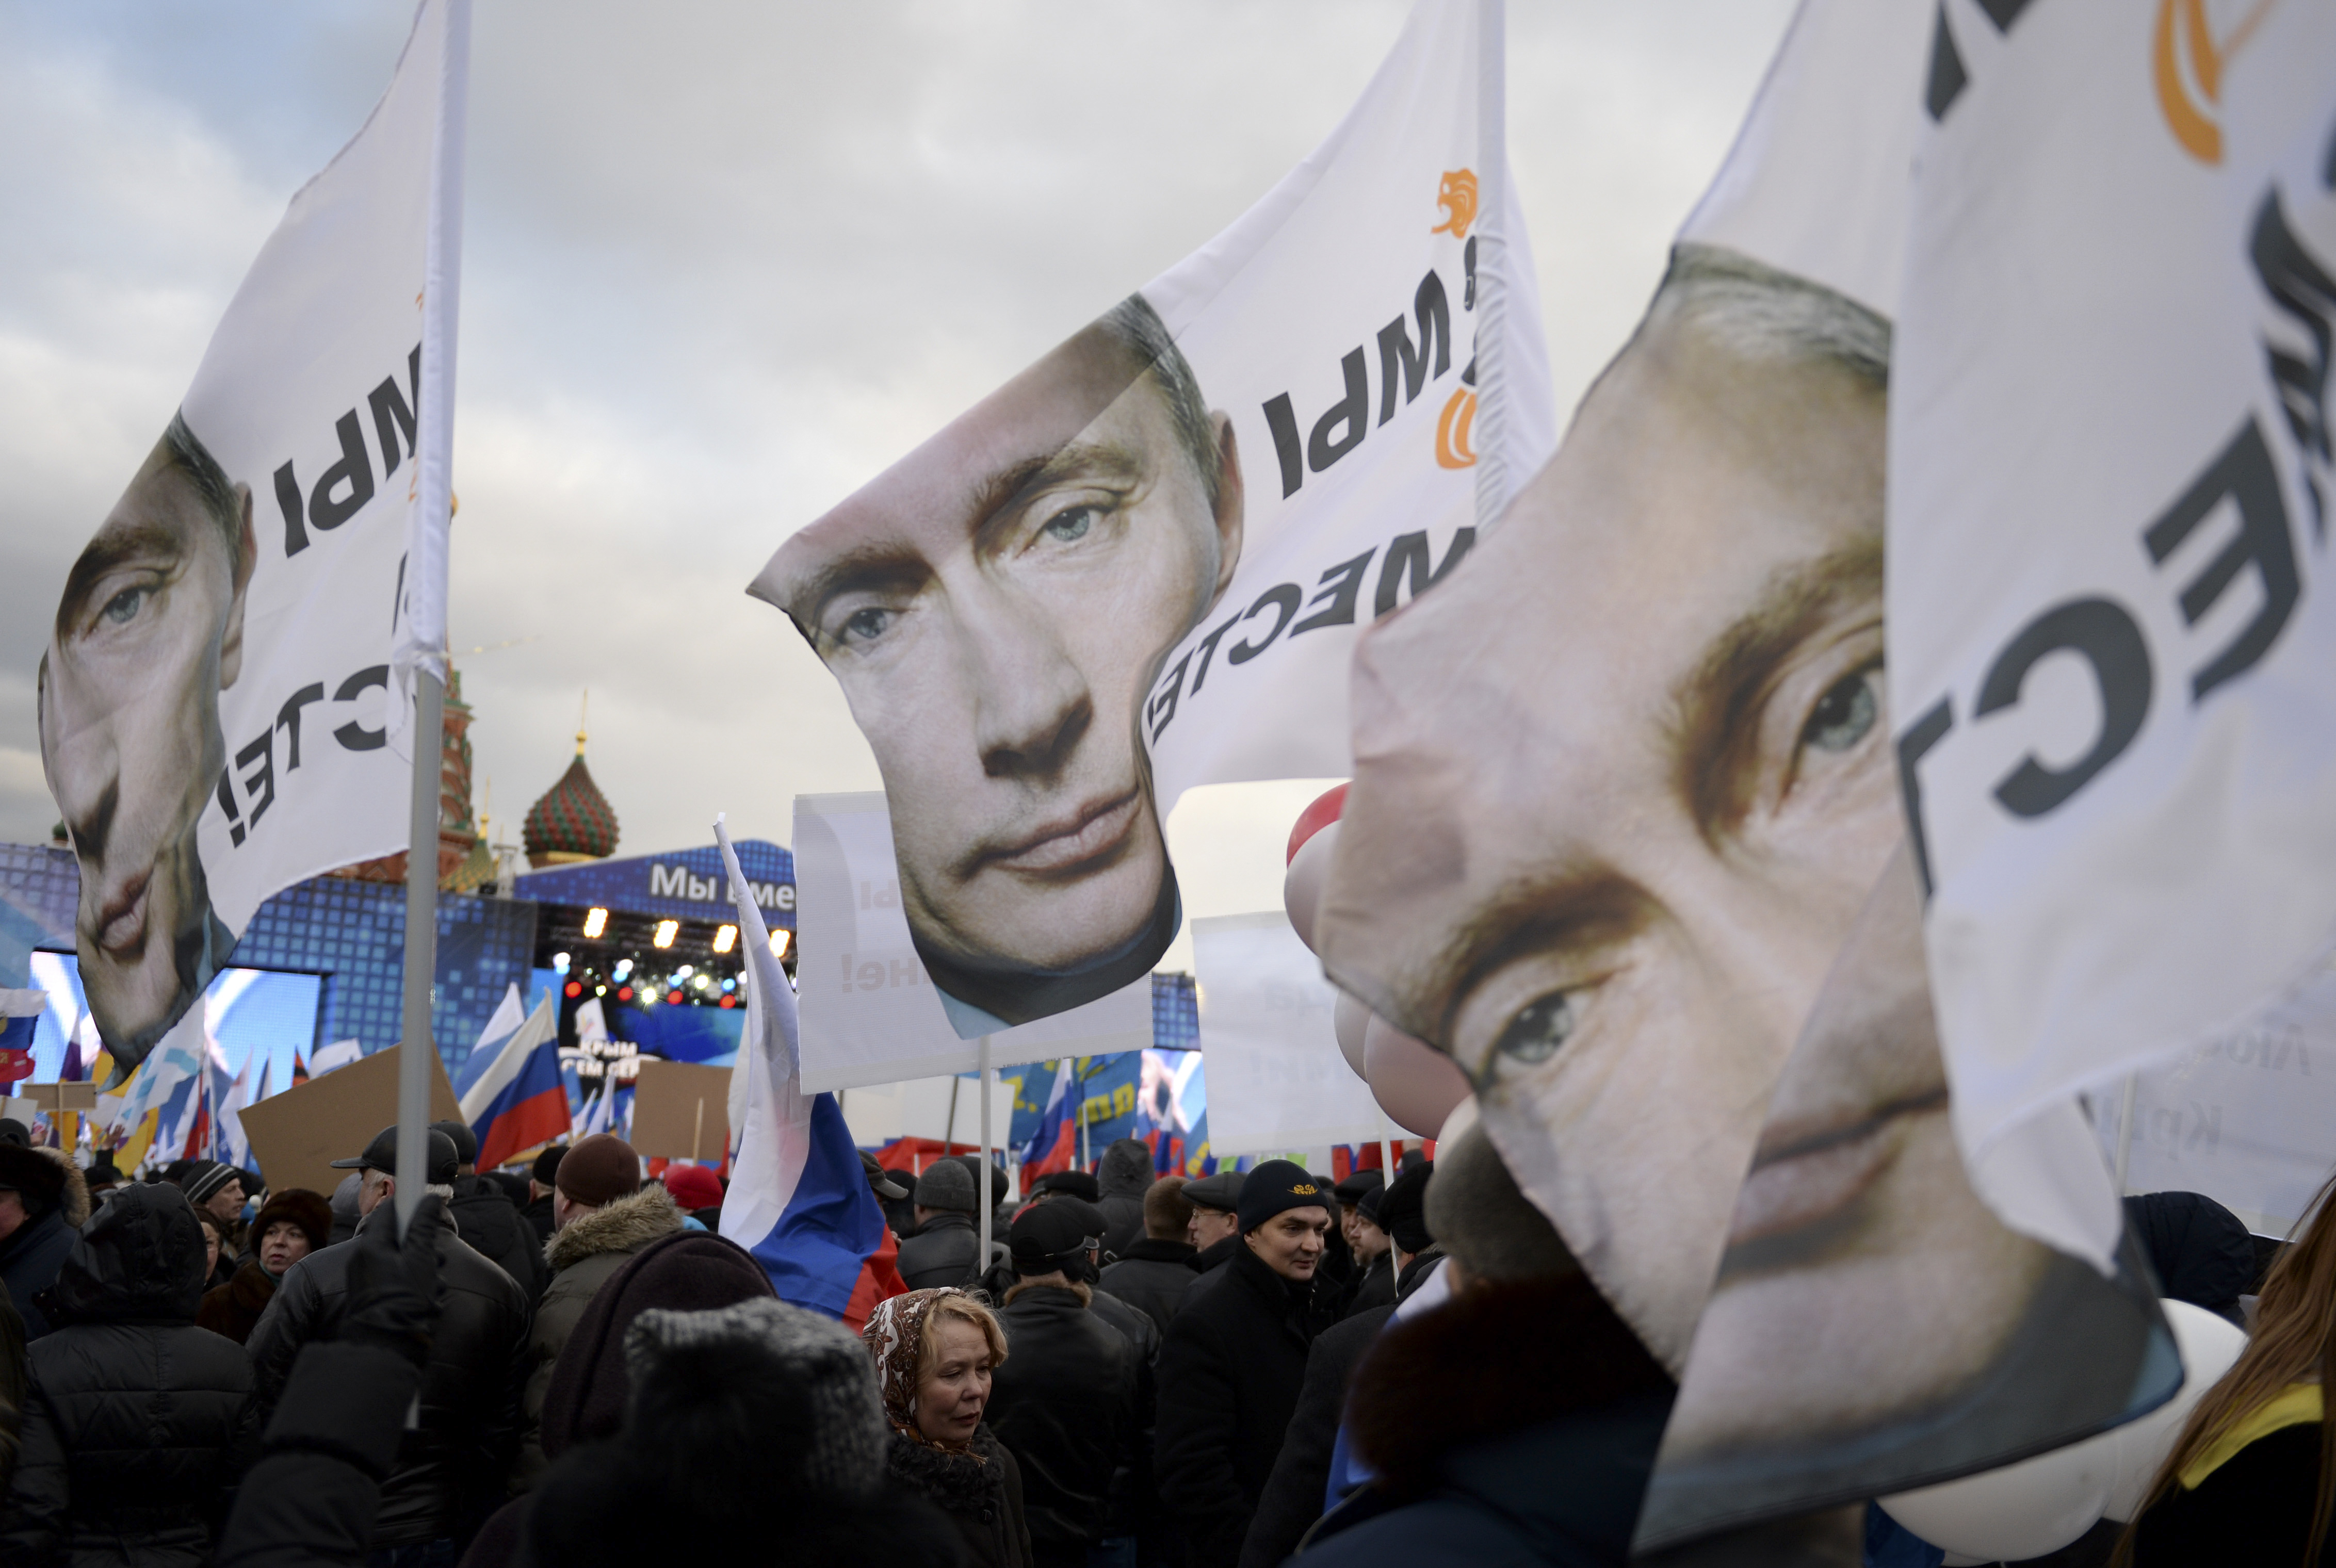 Banners in Moscow's Red Square bear the portrait of Russian President Vladimir Putin and the slogan “We Are Together,” referring to Russia and Crimea, which Russia seized from Ukraine. 